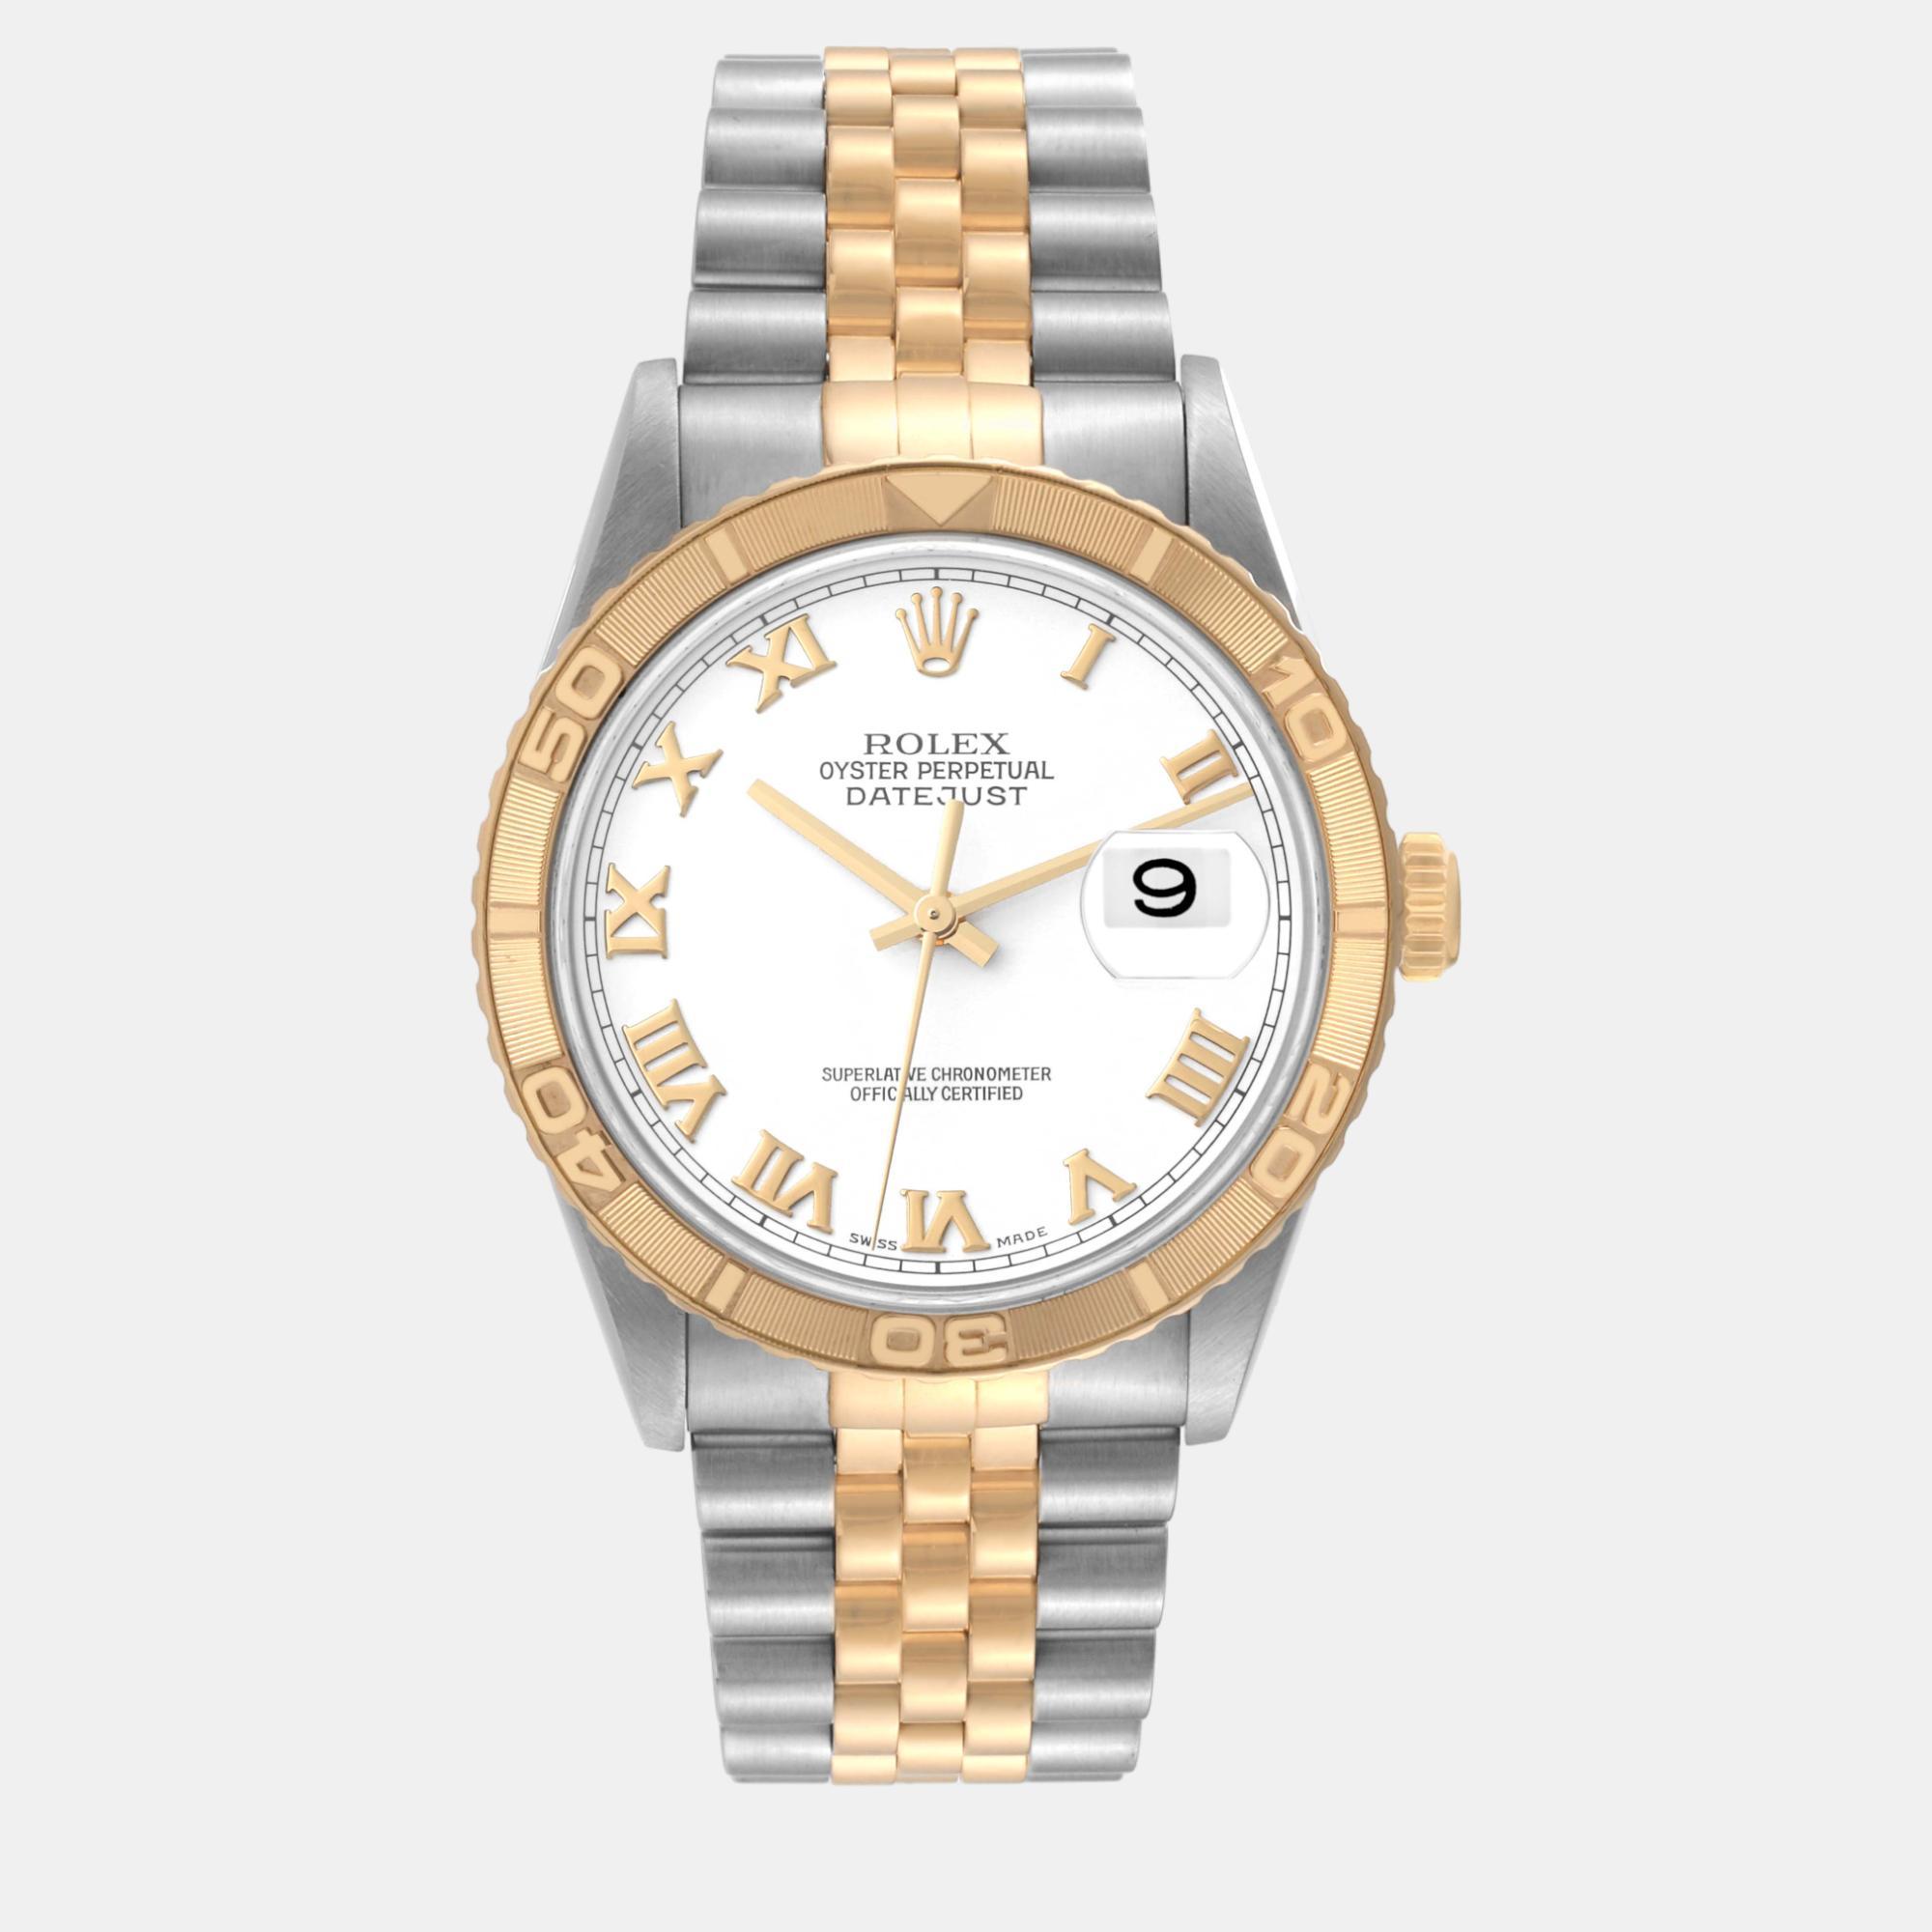 Discover the essence of luxury with a genuine Rolex watch. Impeccable in design and engineering it embodies heritage precision and prestige making it the ultimate statement of success and style.